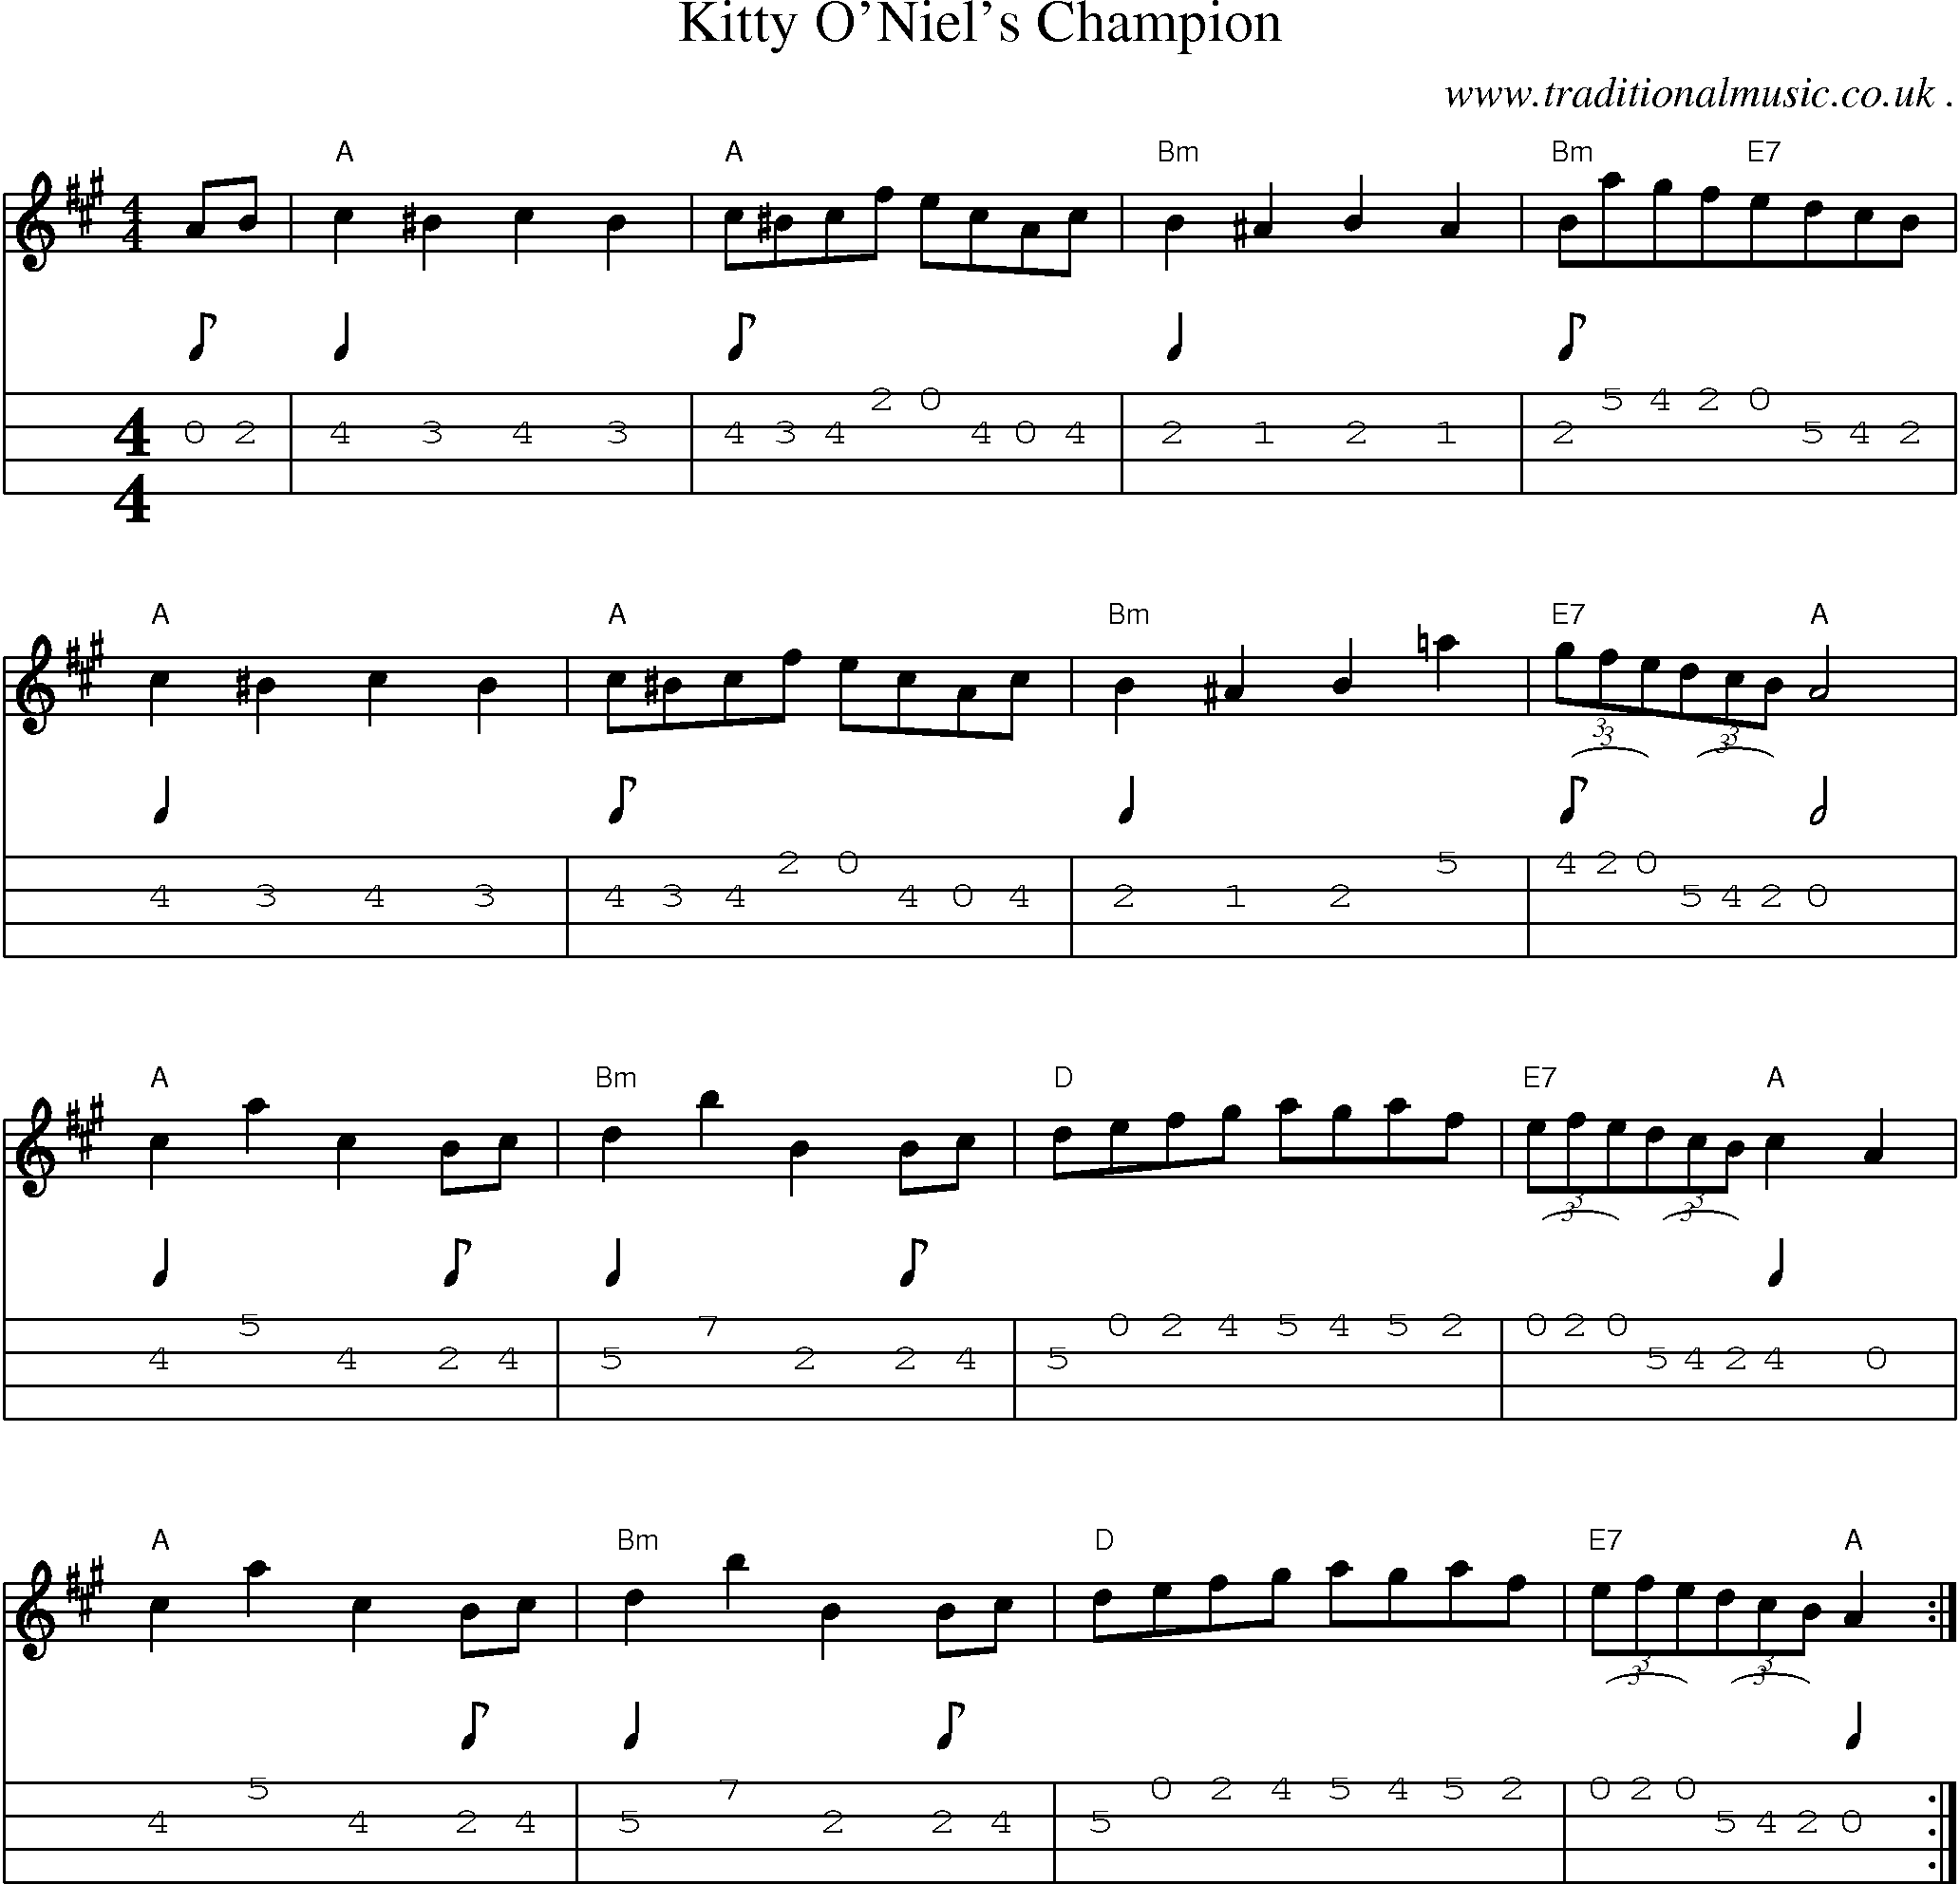 Sheet-Music and Mandolin Tabs for Kitty Oniels Champion